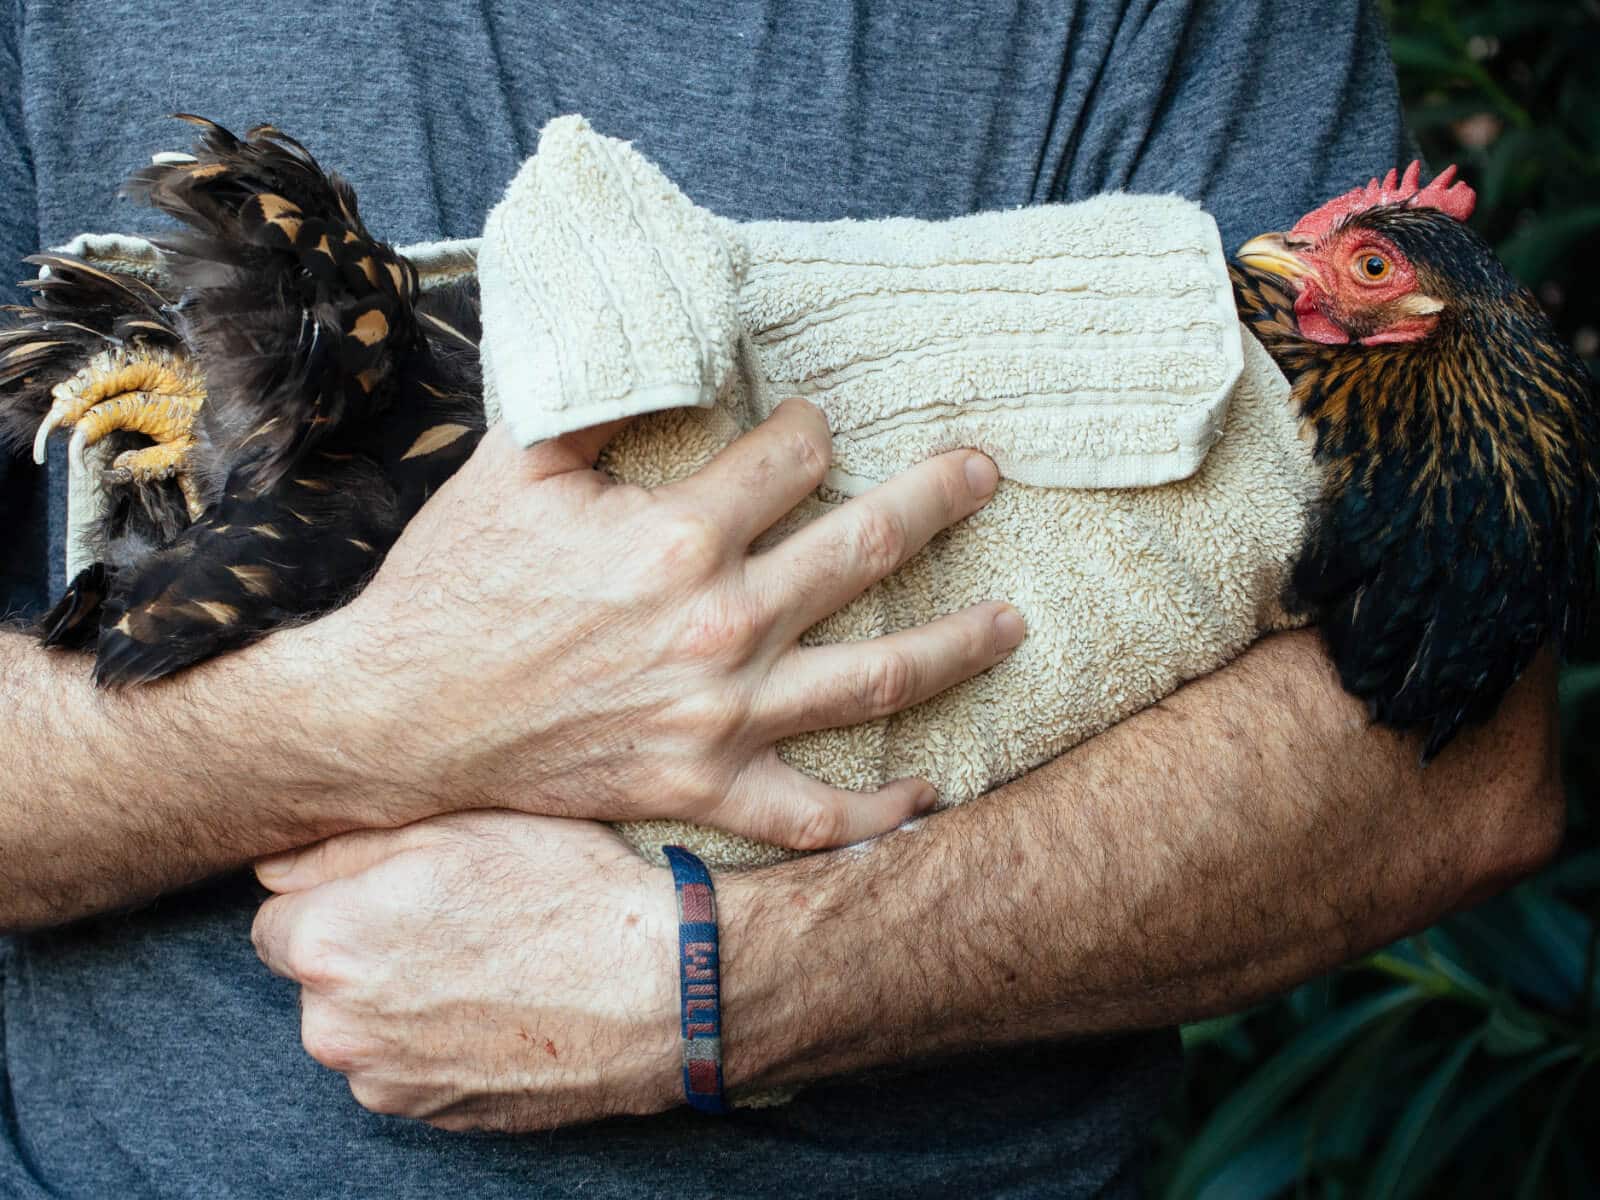 Cradle your hen in a towel to keep her still